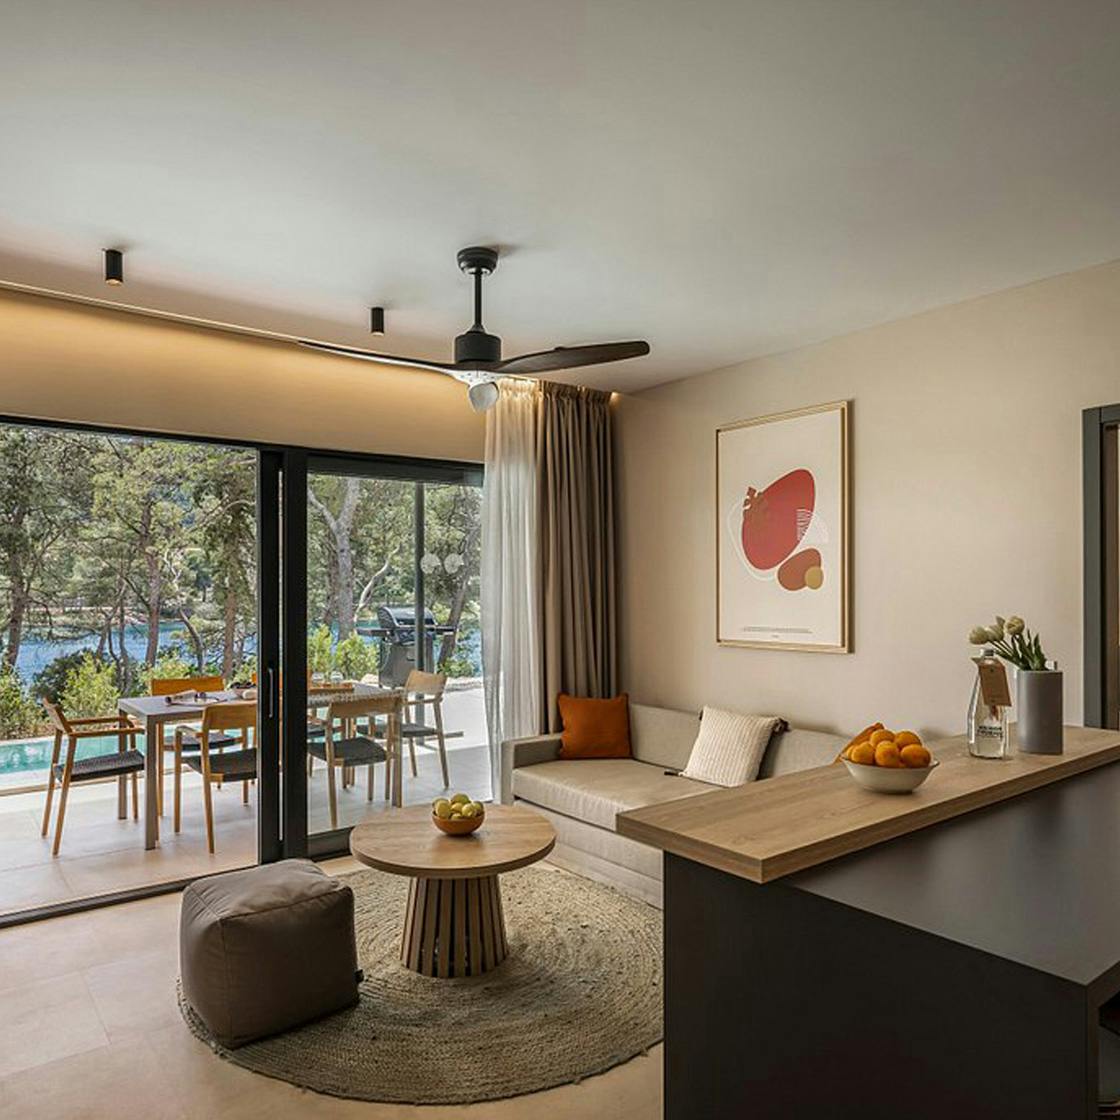 Valamar Amicor kitchen and living room open space